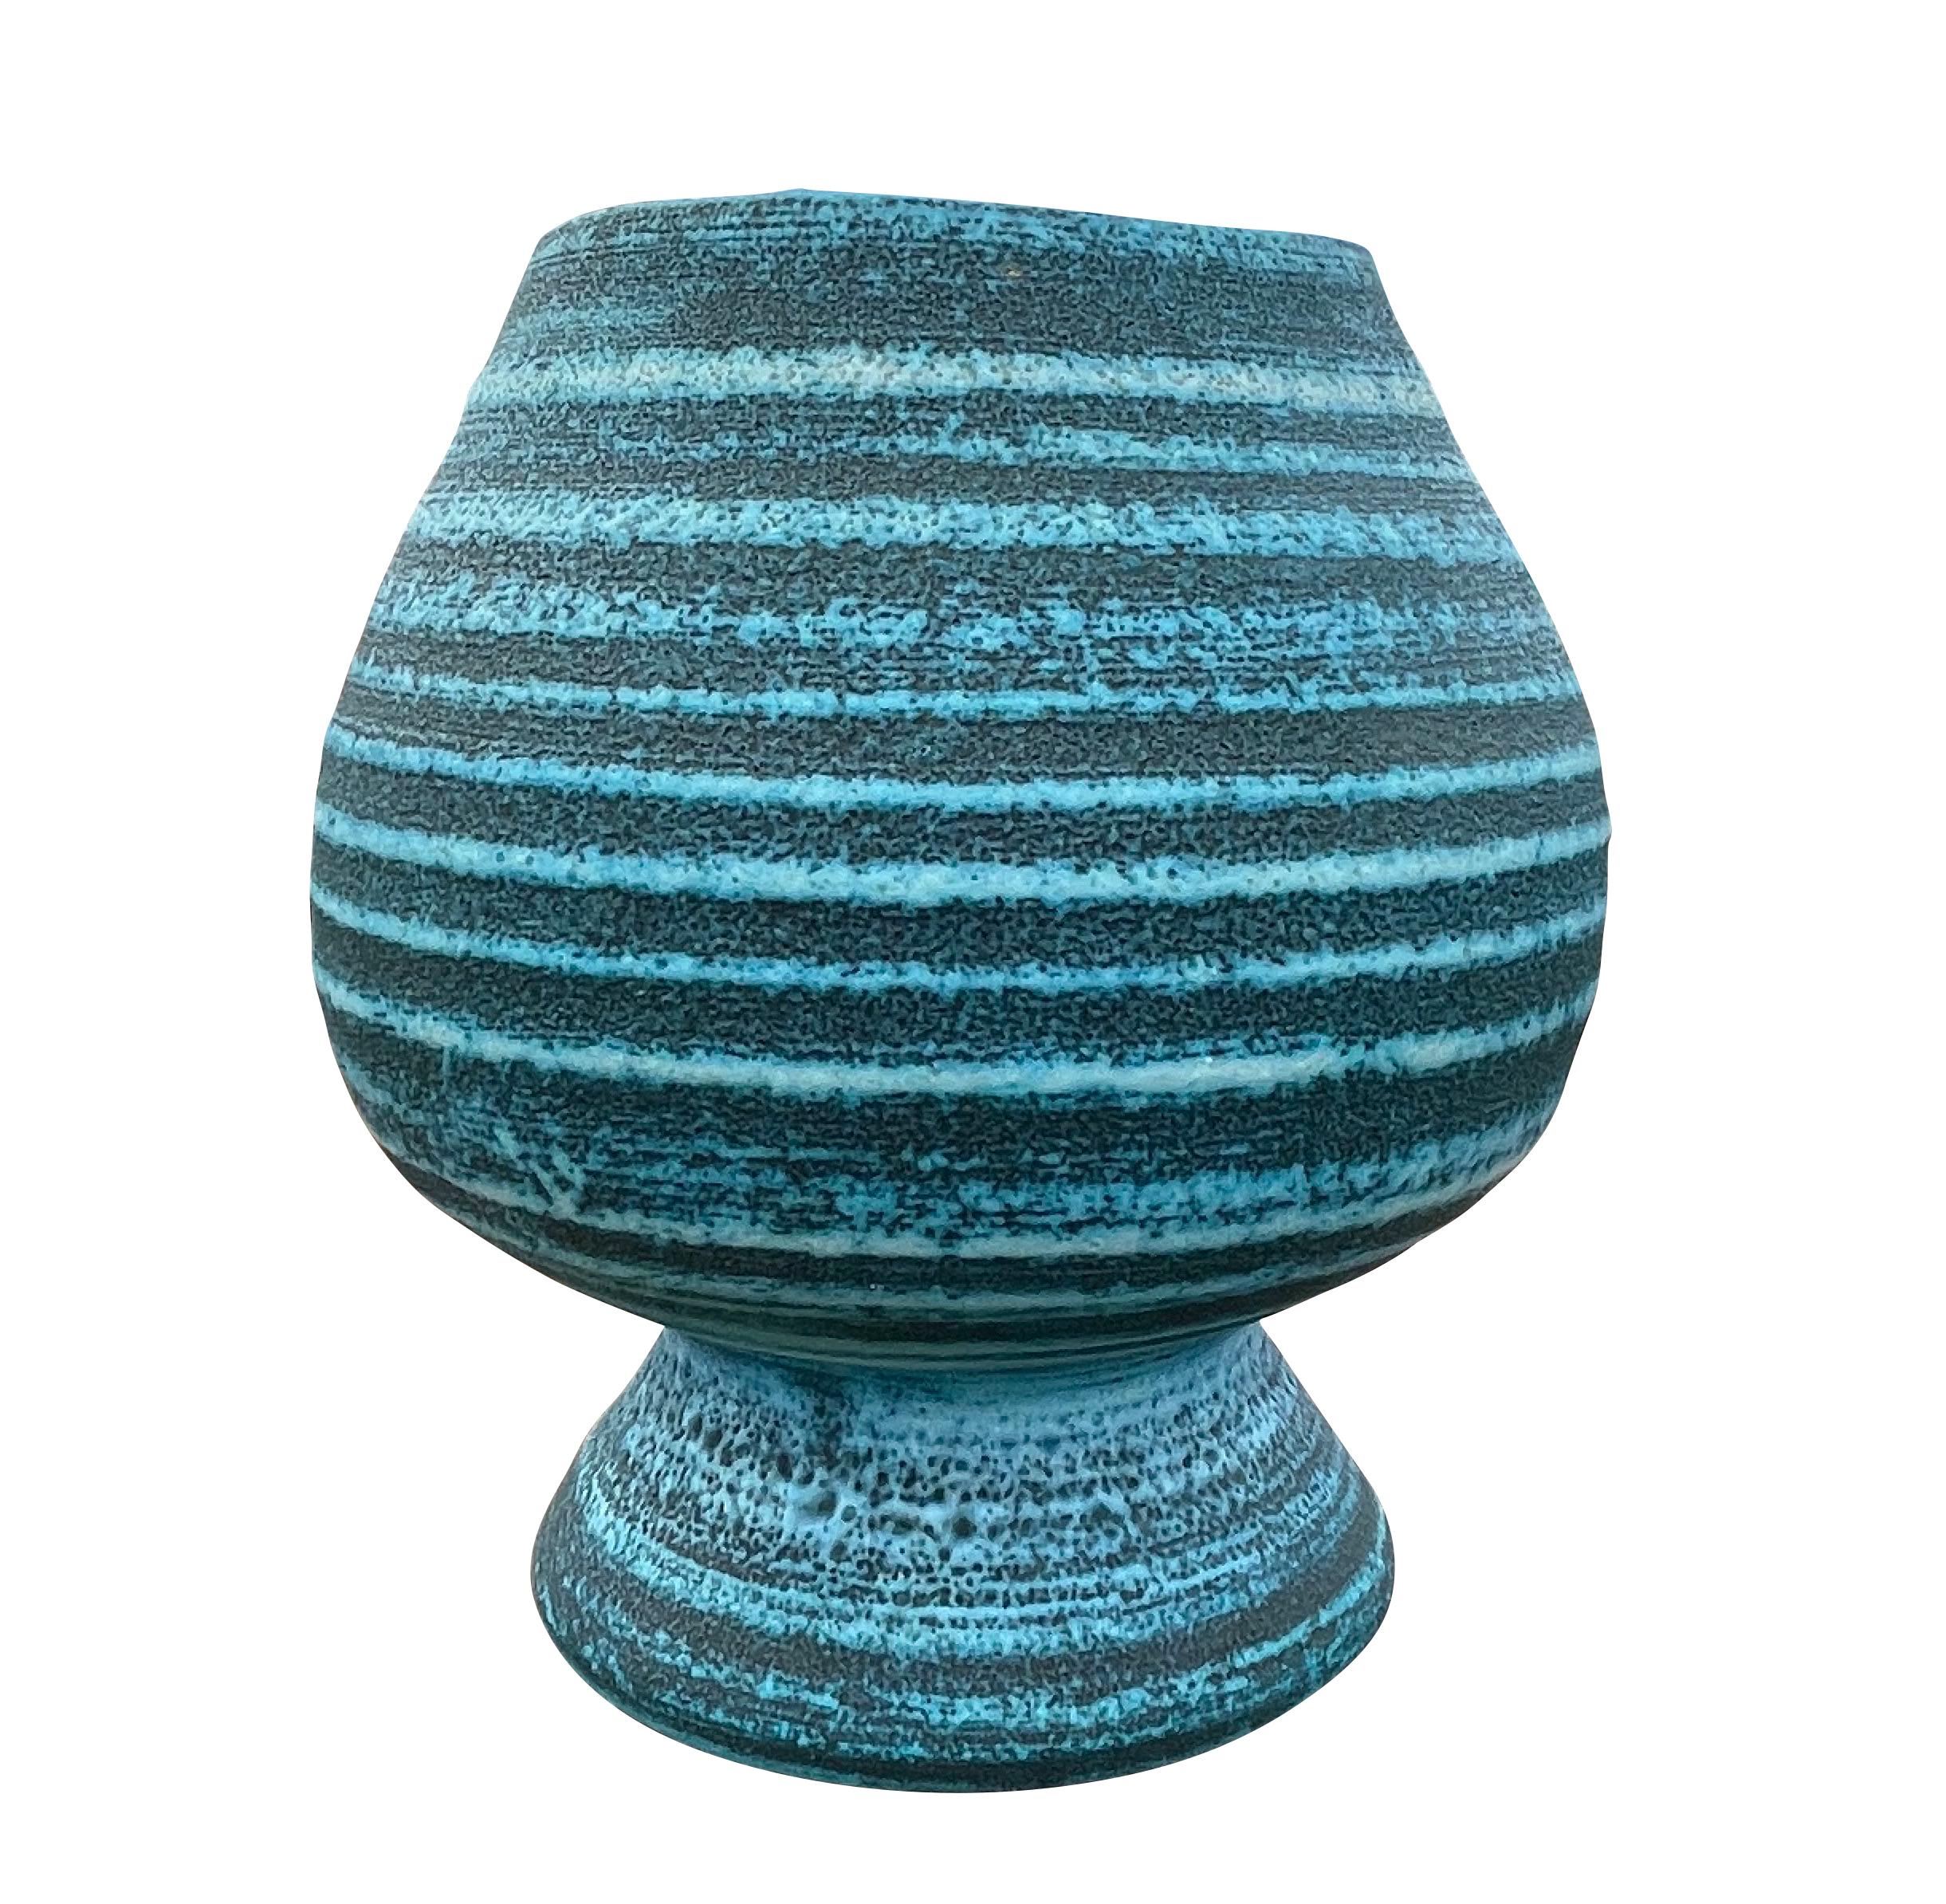 Mid Century French horizontal stripe deep turquoise and charcoal vase by Accolay.
Accolay pottery was hand made in Accolay, France from 1945 to 1989. 
From a collection of four pieces (S6182/3/4 )
